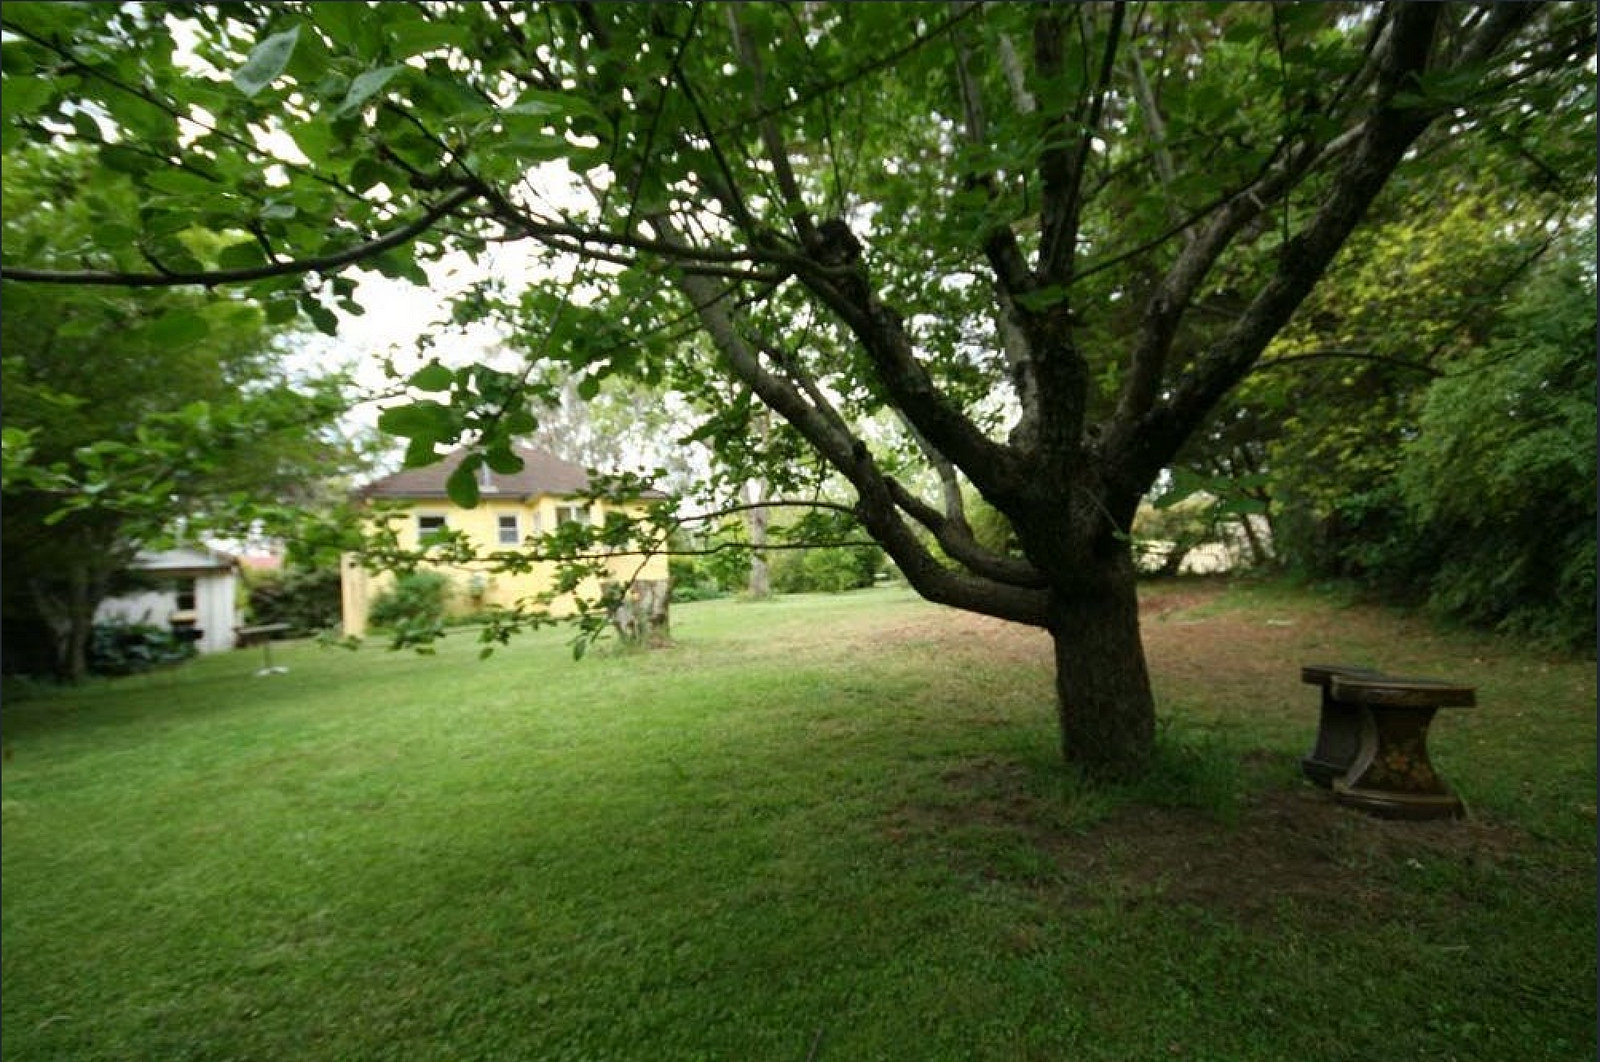 backyard with freshly mown grass and large apple tree on right with yellow house in background.